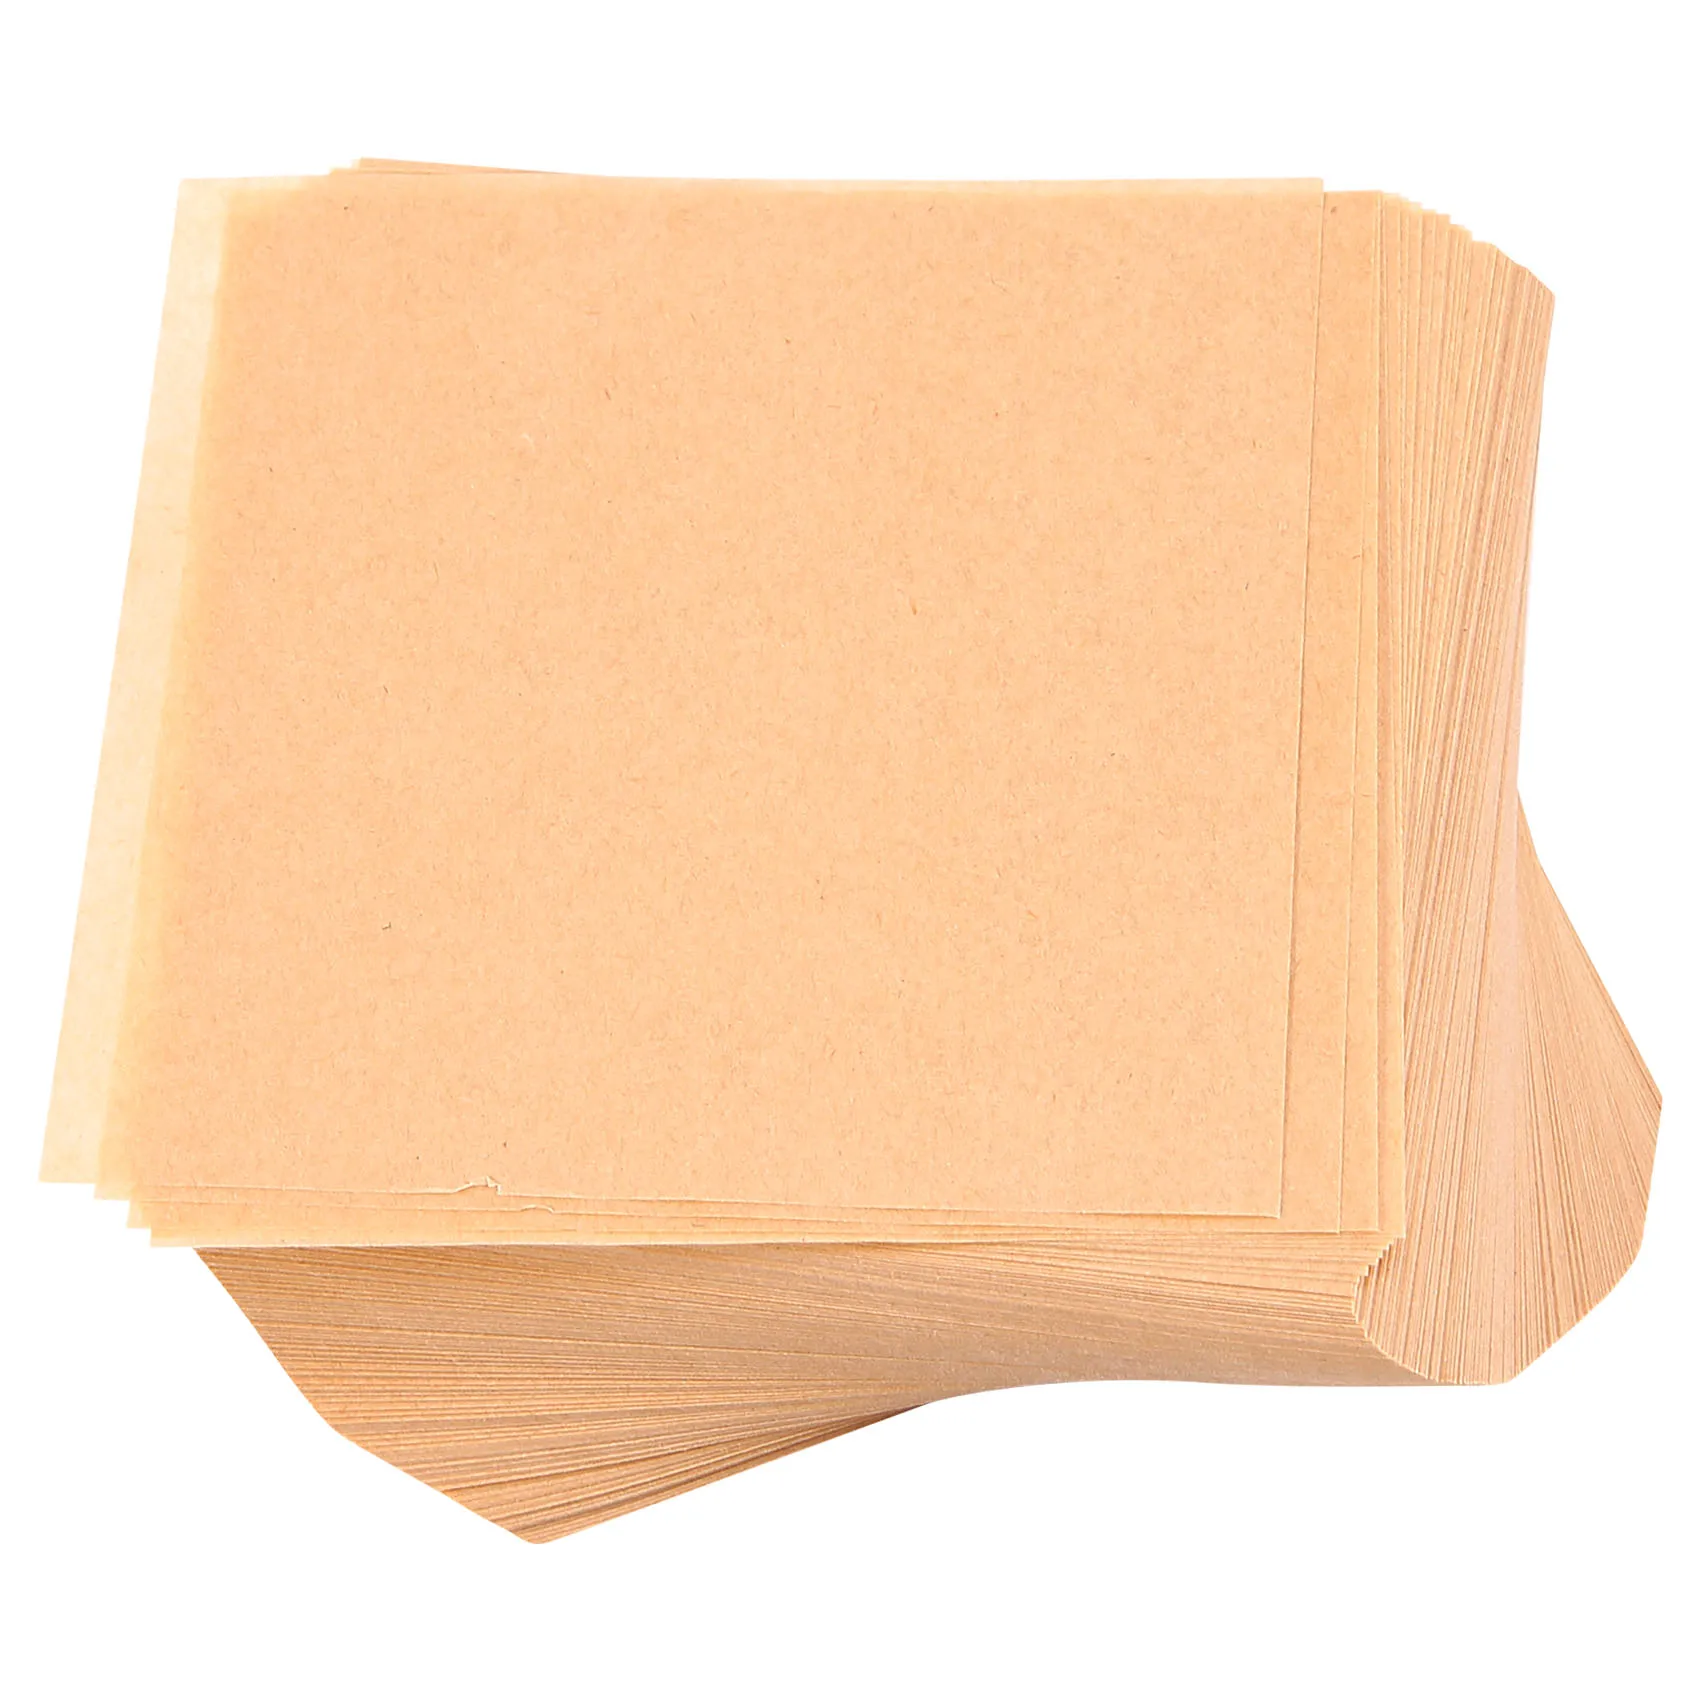 https://ae01.alicdn.com/kf/Se1dee3669549485cbe846115429e3539B/500-Pcs-Unbleached-Parchment-Paper-Baking-Sheets-Inches-Non-Stick-Precut-Baking-Parchment-Perfect-for-Wrapping.jpg